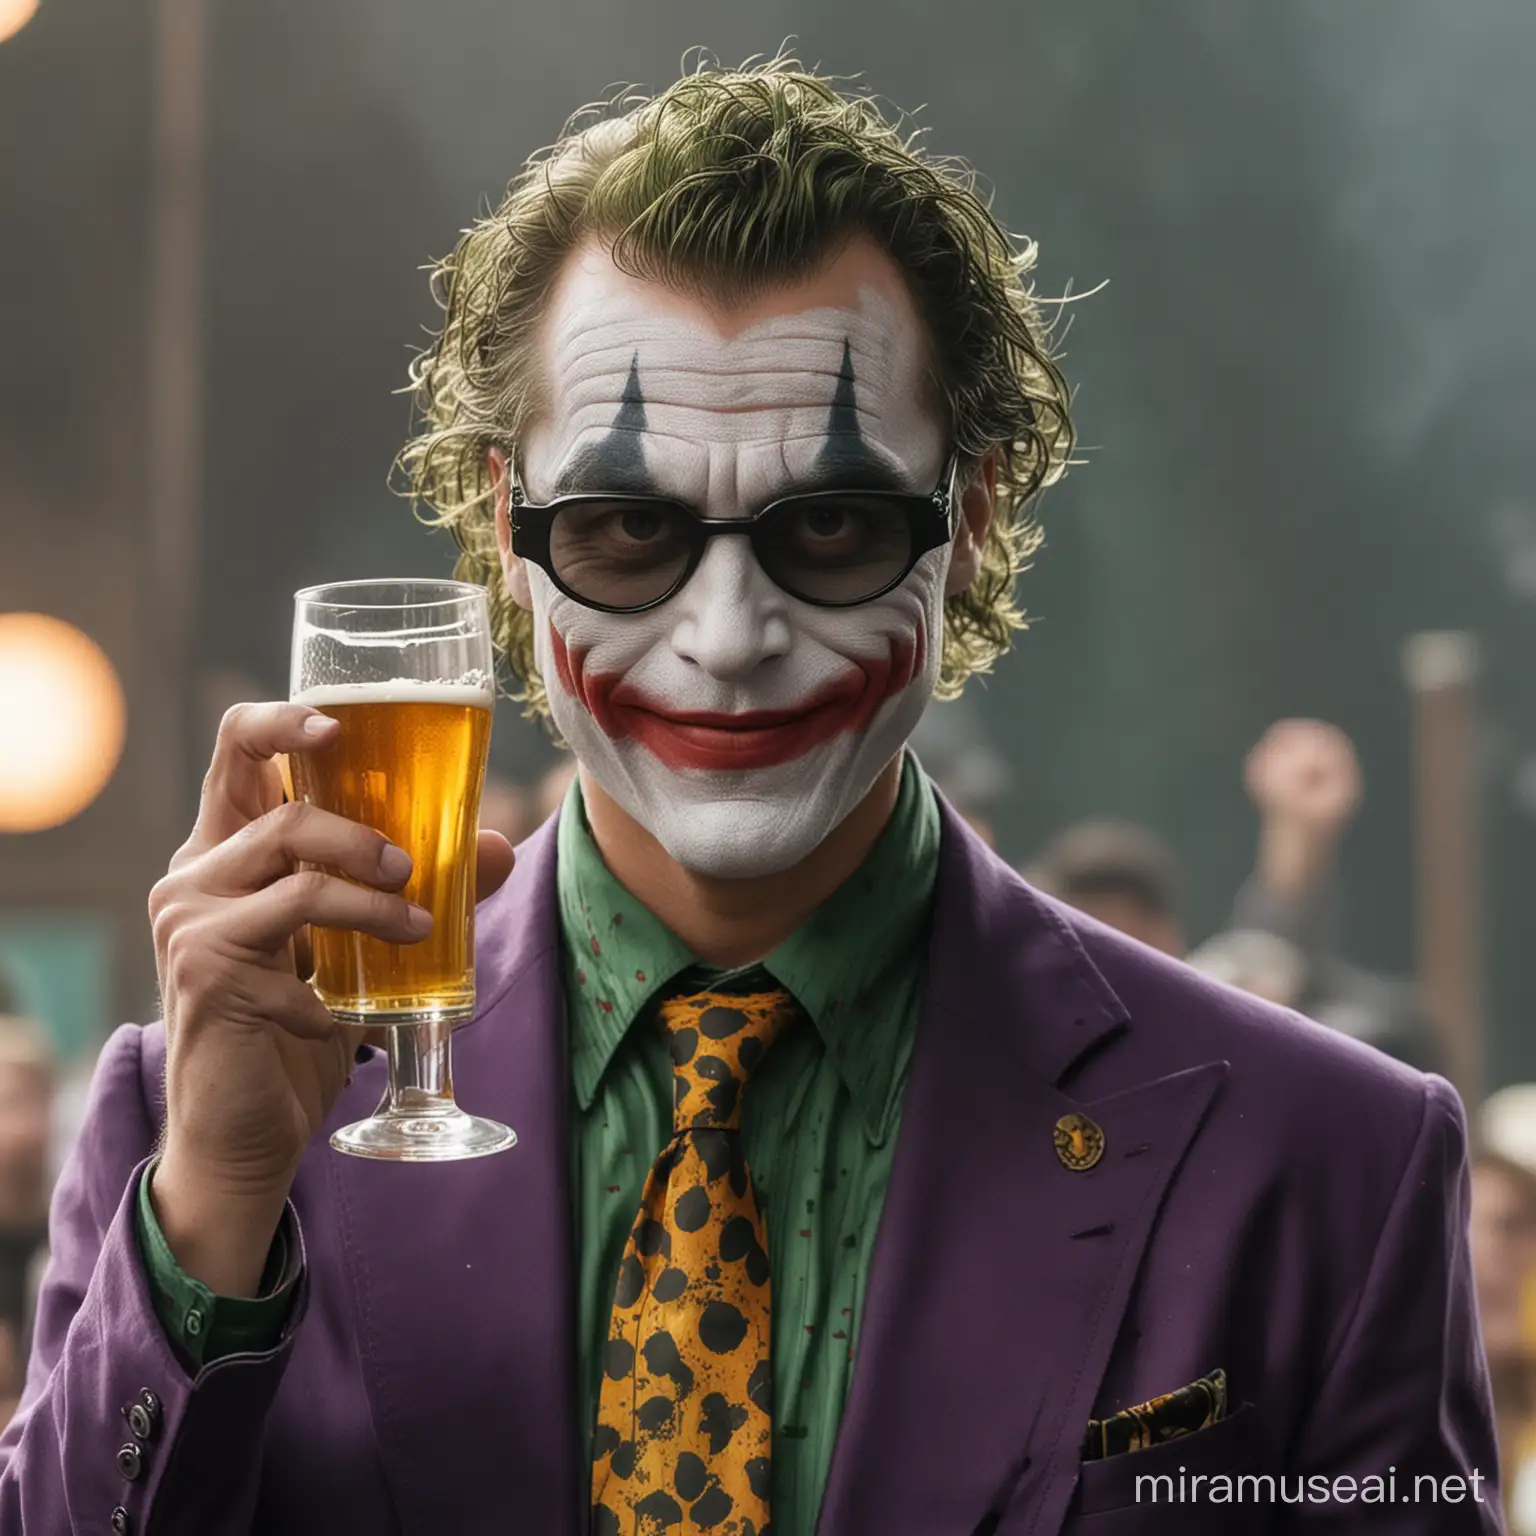 The Joker wearing weird Eclipse glasses and holding a beer